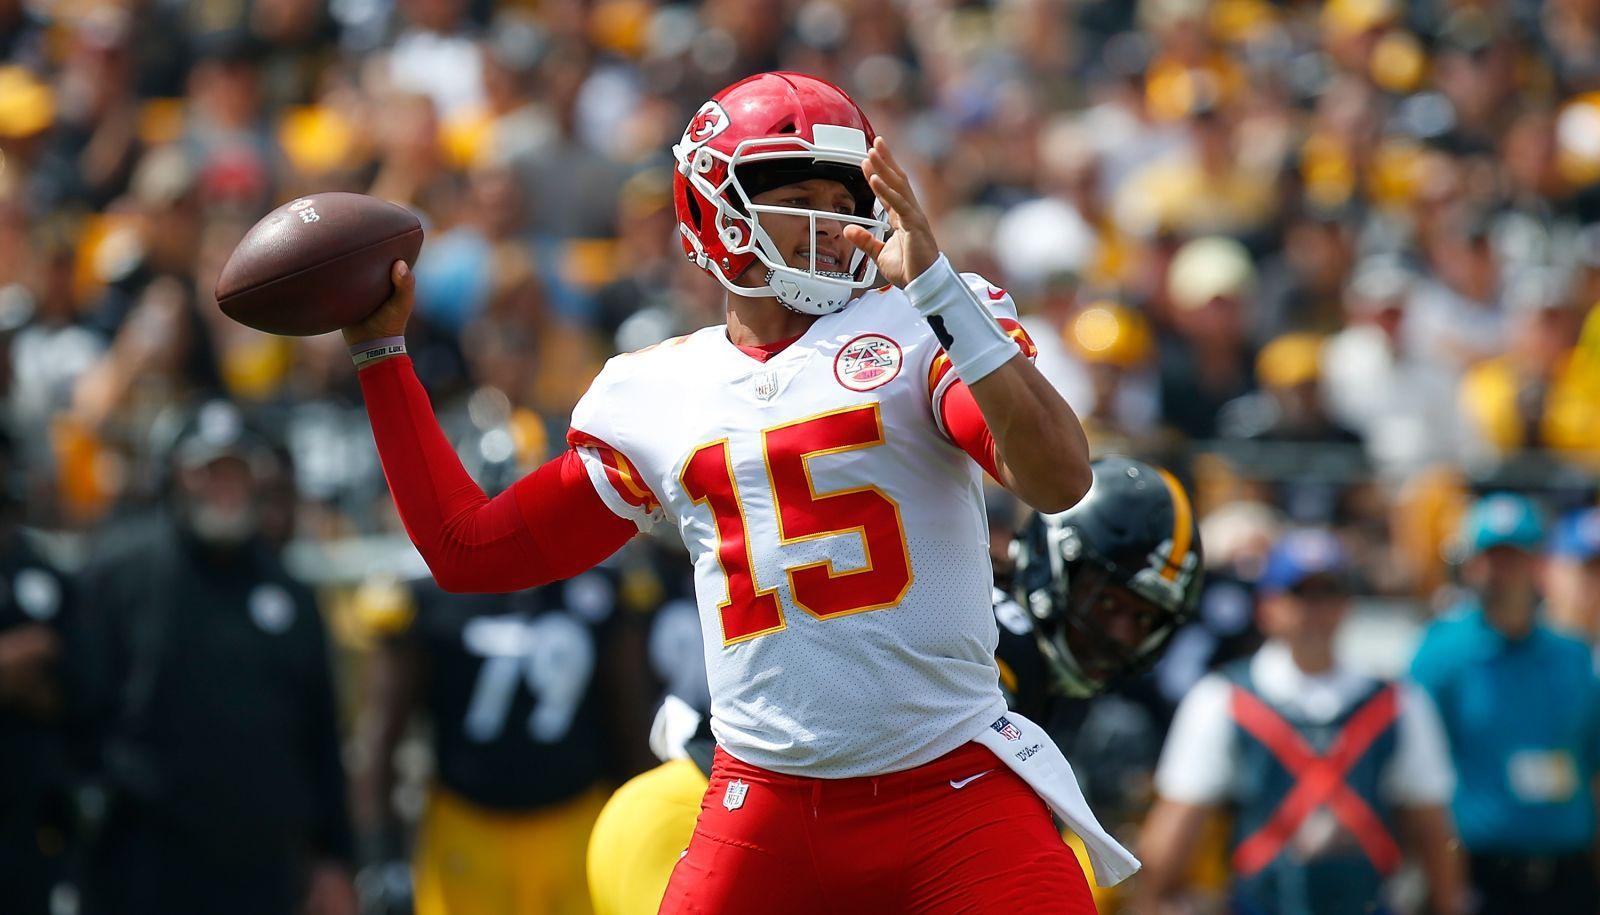 Patrick Mahomes will have a hard time maintaining touchdown totals